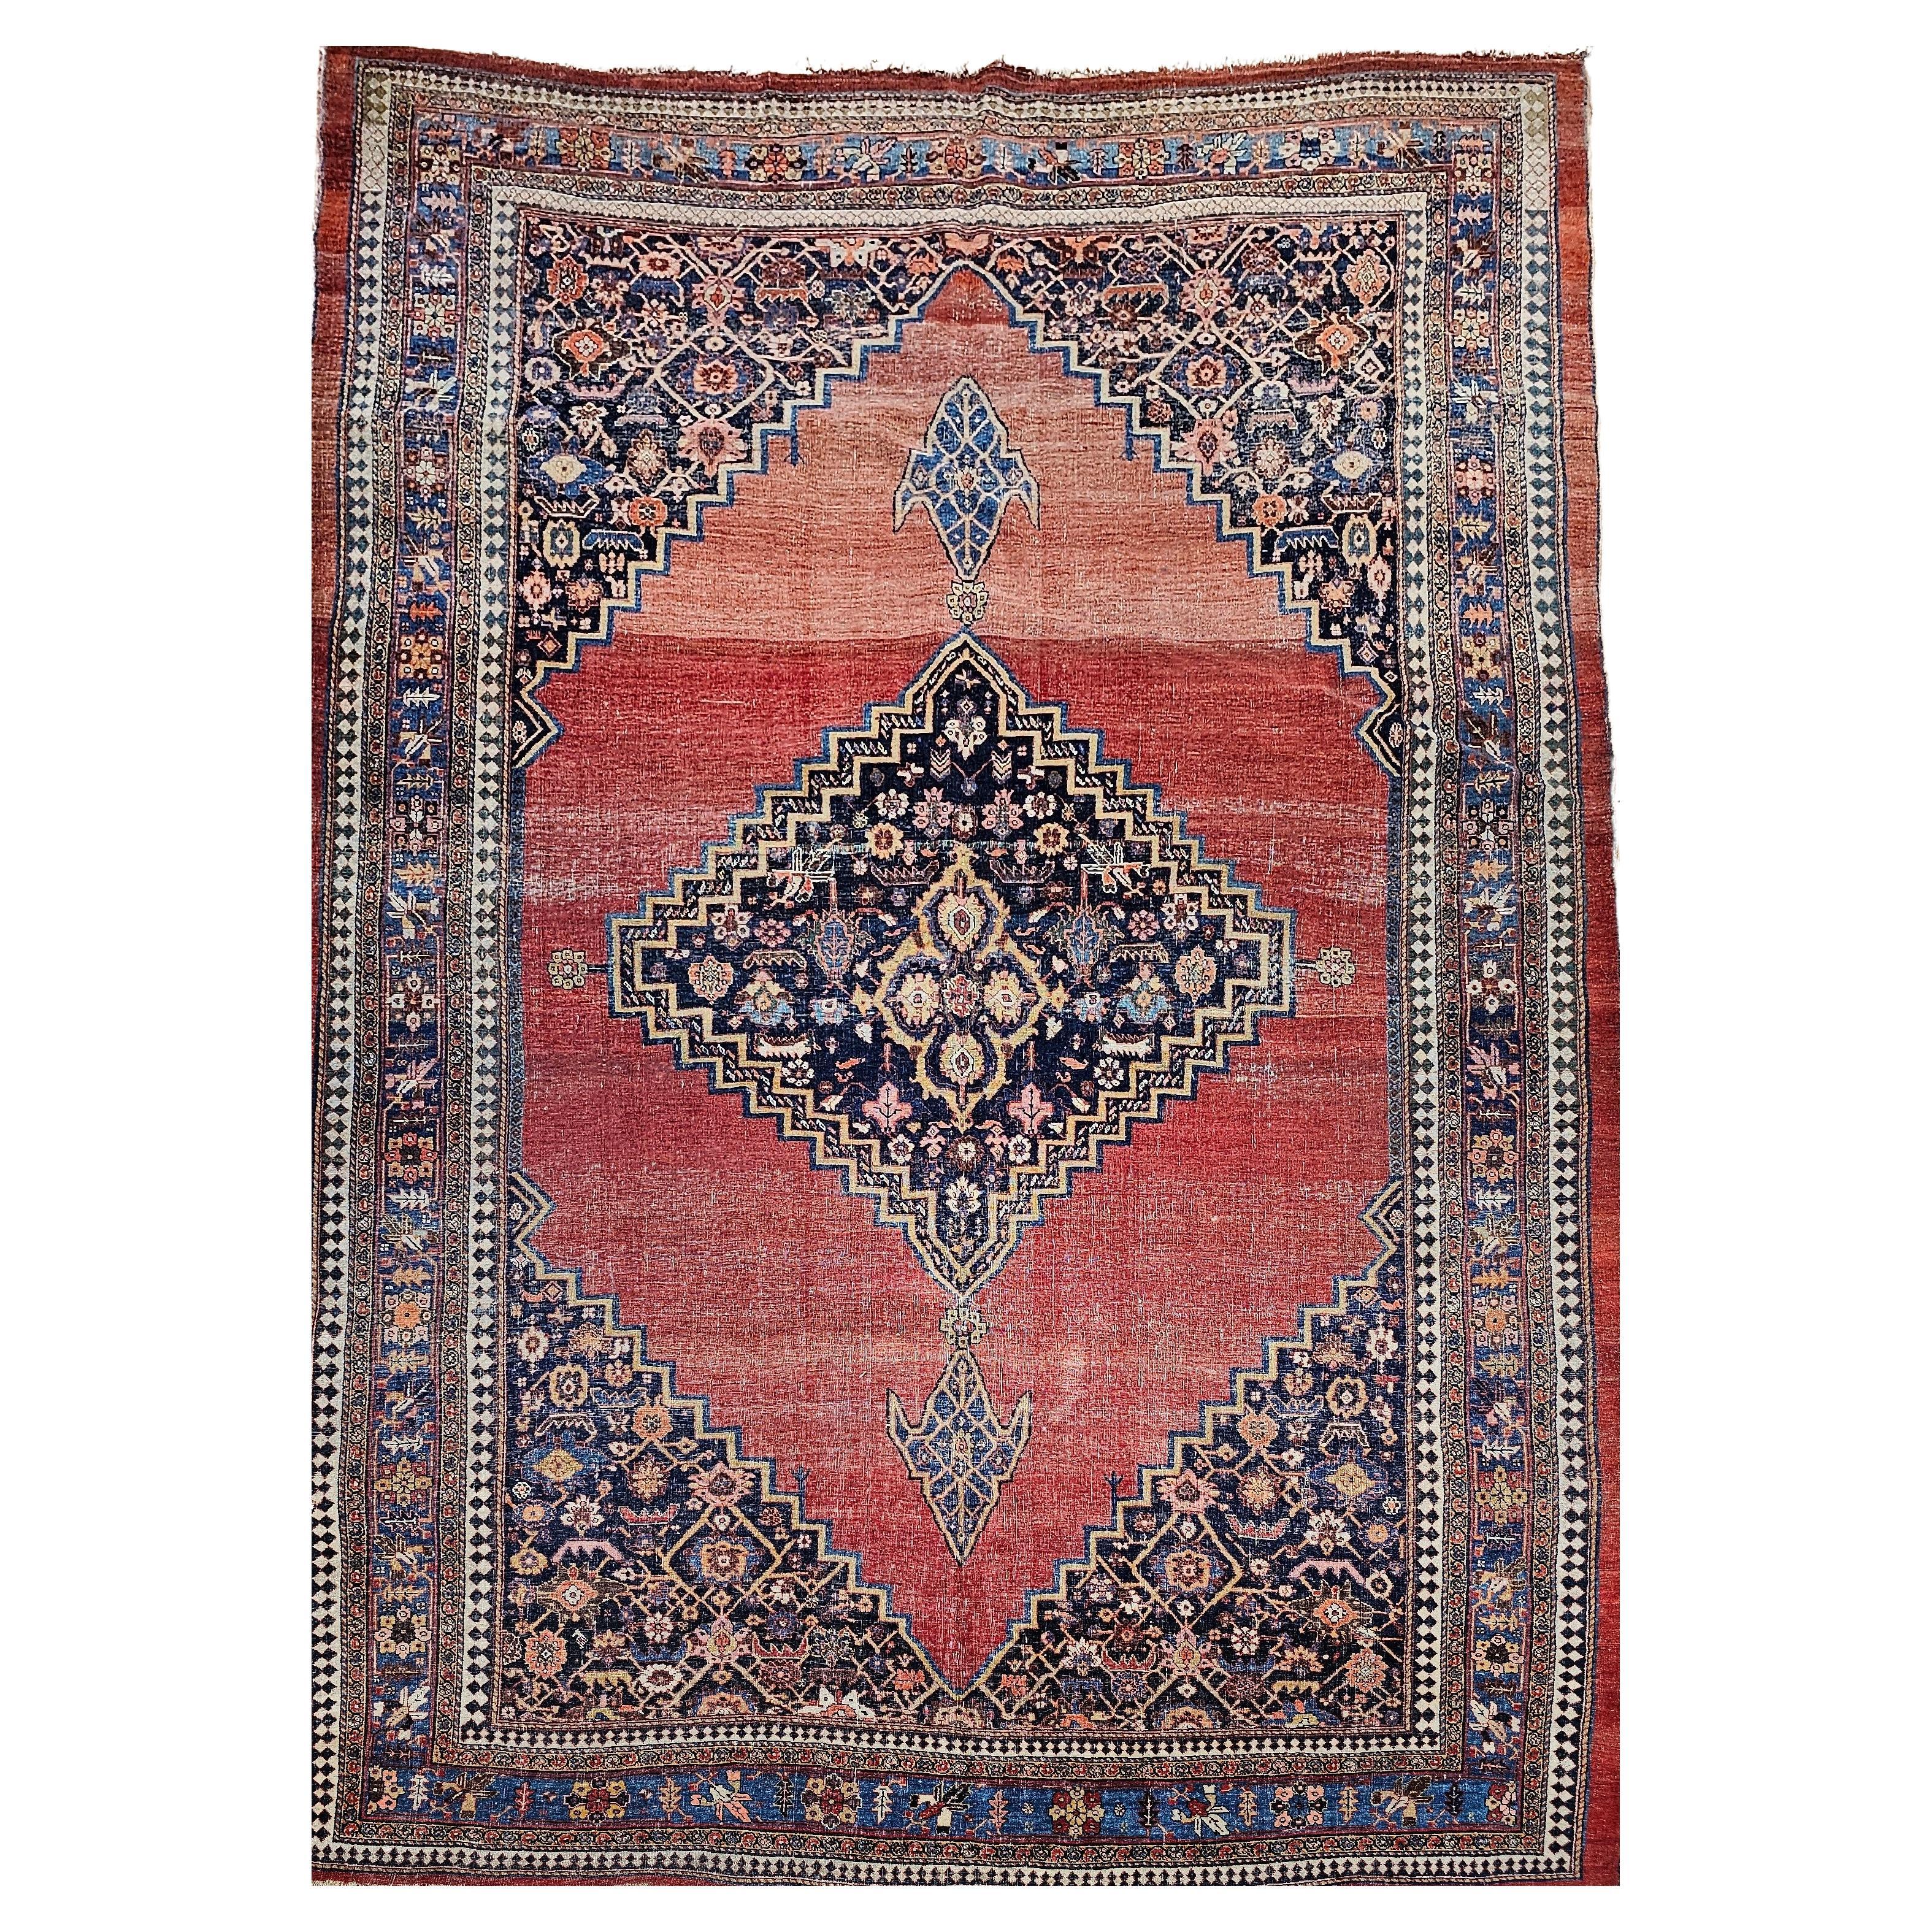 19th Century Vintage Persian Bidjar Room Size Rug in Red, French Blue, Yellow